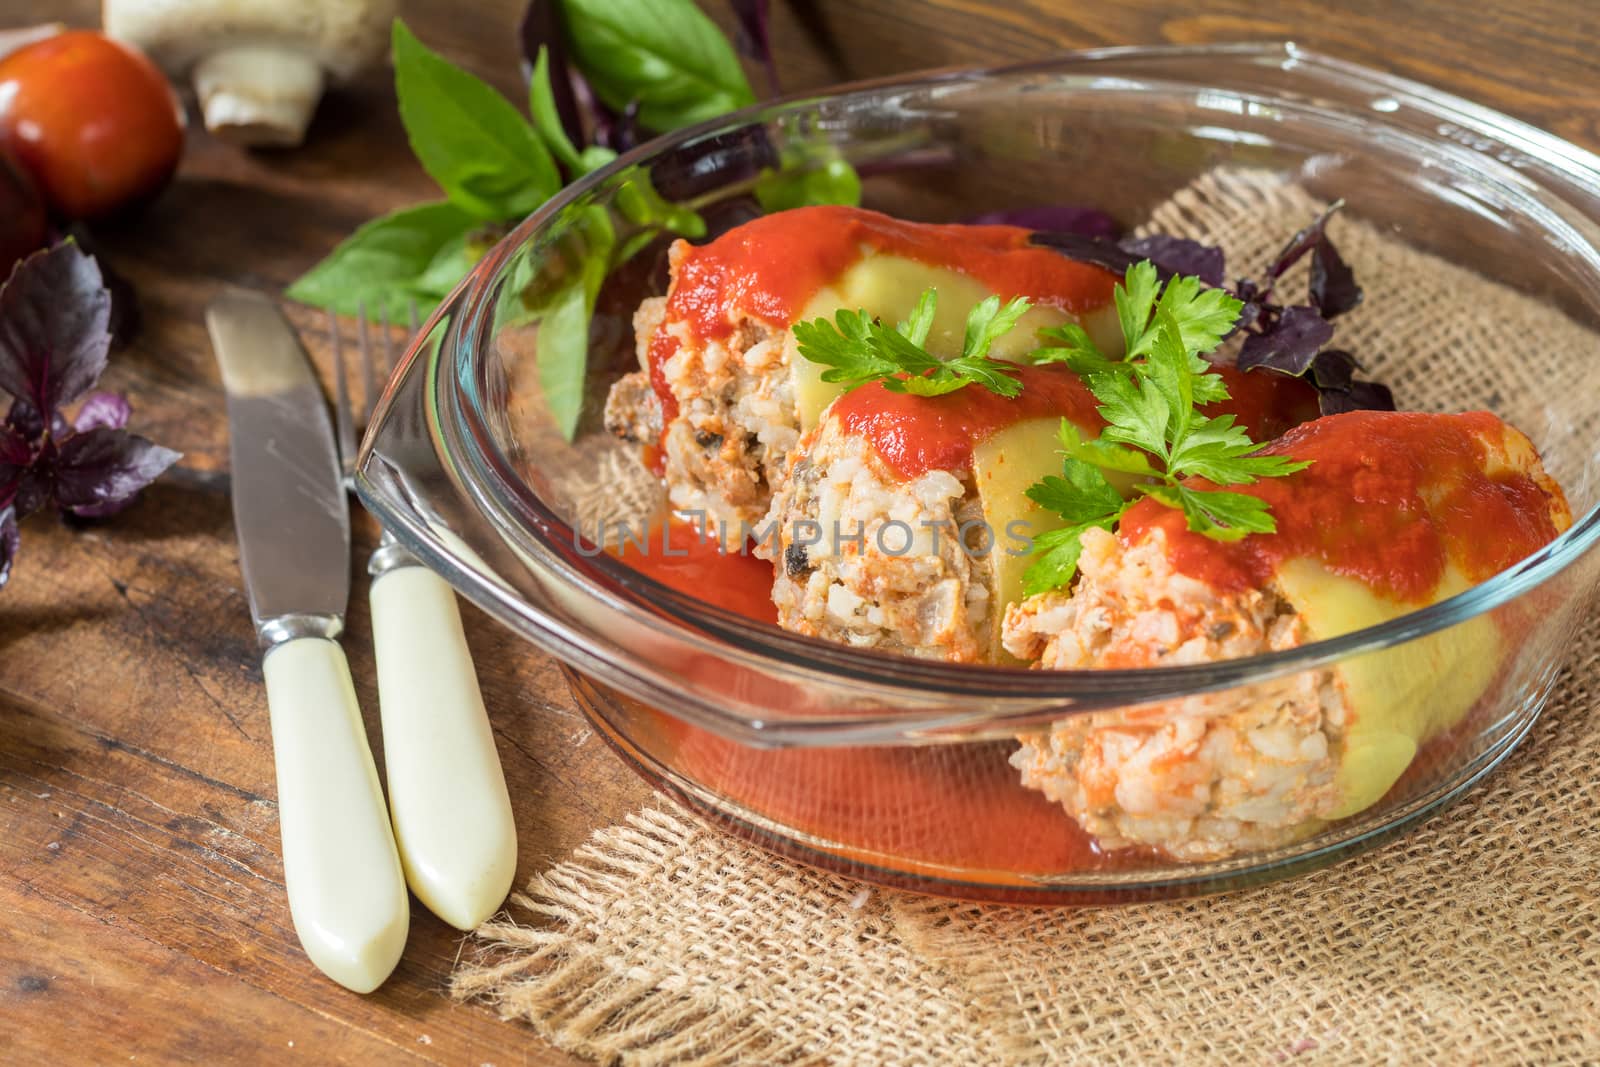 Cooked stuffed pepper served in a transparent glass pot by ArtSvitlyna